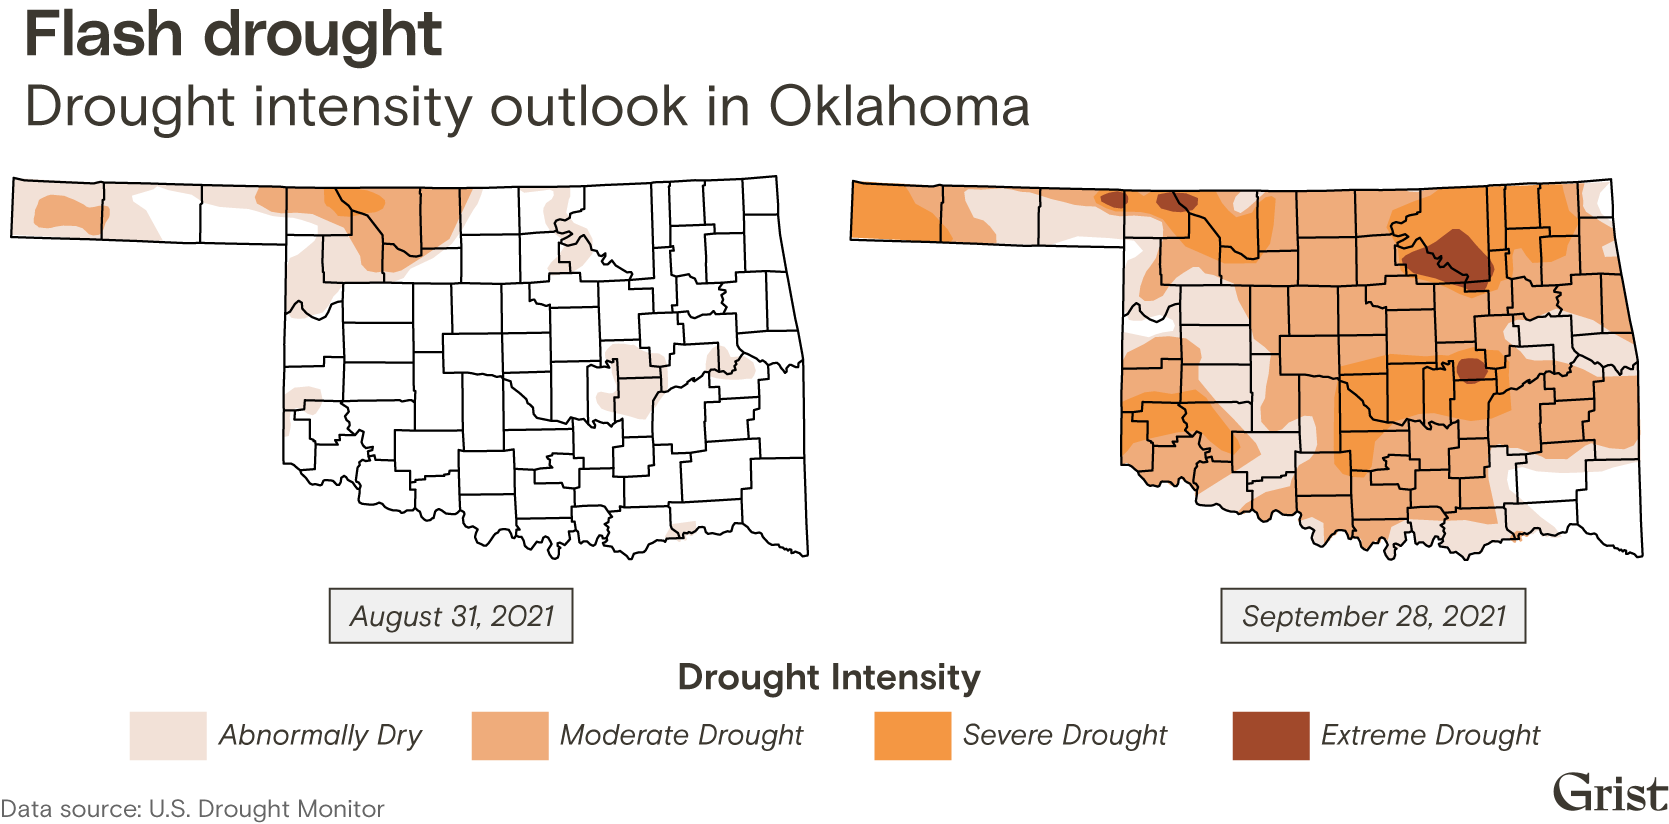 Two maps of Oklahoma showing drought intensity on August 31, 2021, and September 28, 2021. On August 28, drought conditions are mostly limited to the northwestern part of the state. On September 28, drought conditions have covered the entire state.